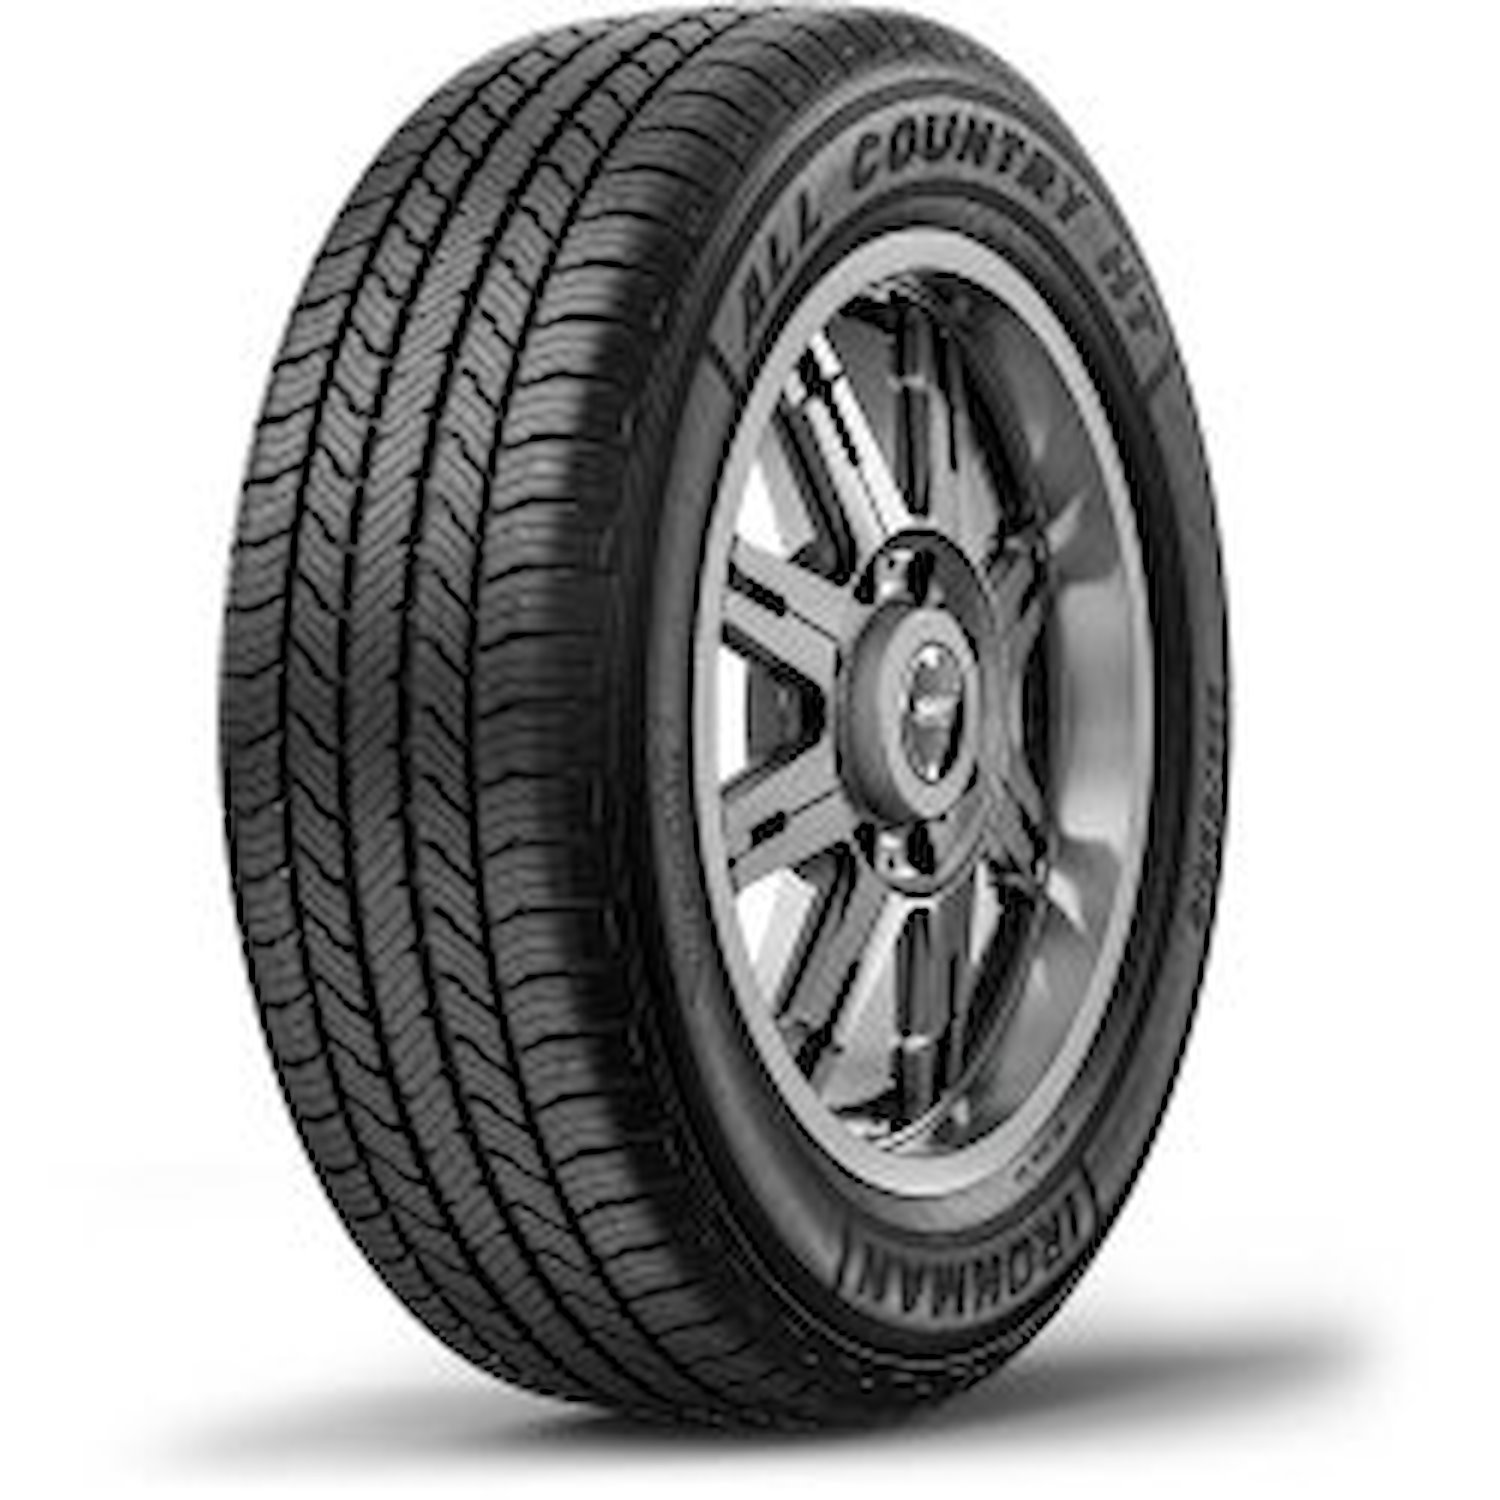 03059 All Country HT Tire, 235/70R16, 106T